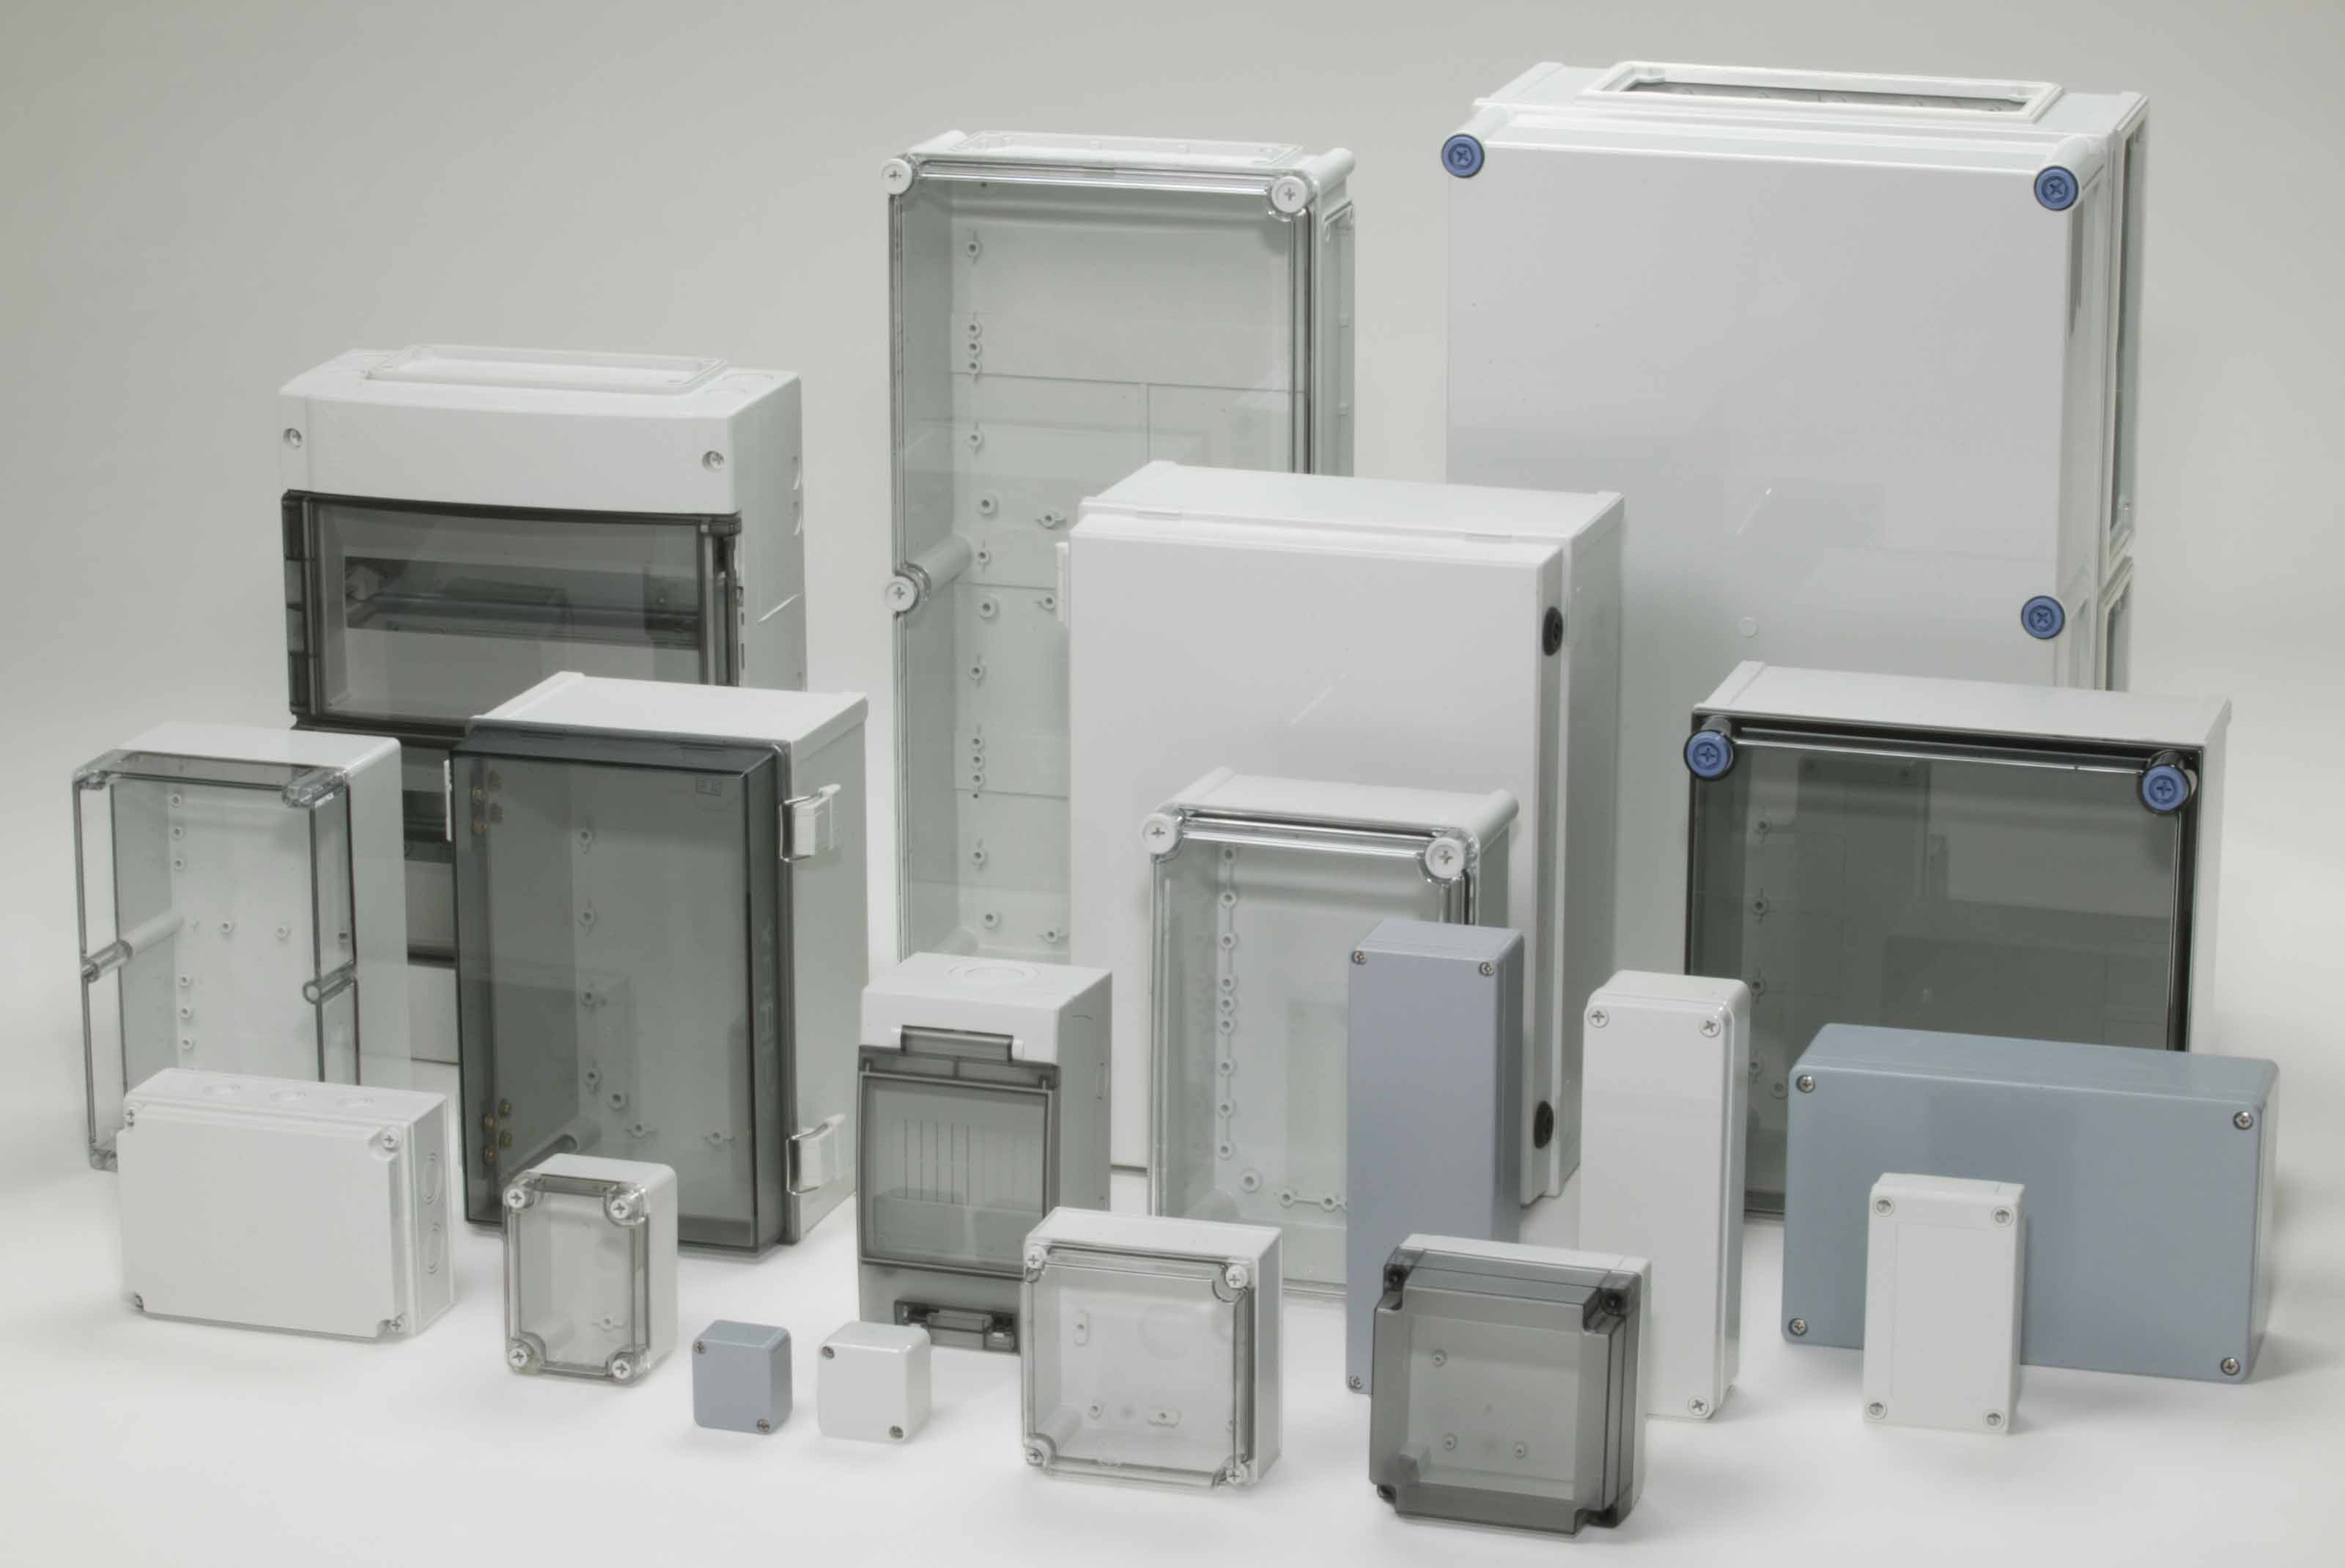 A Selection of PC enclosures from Fibox